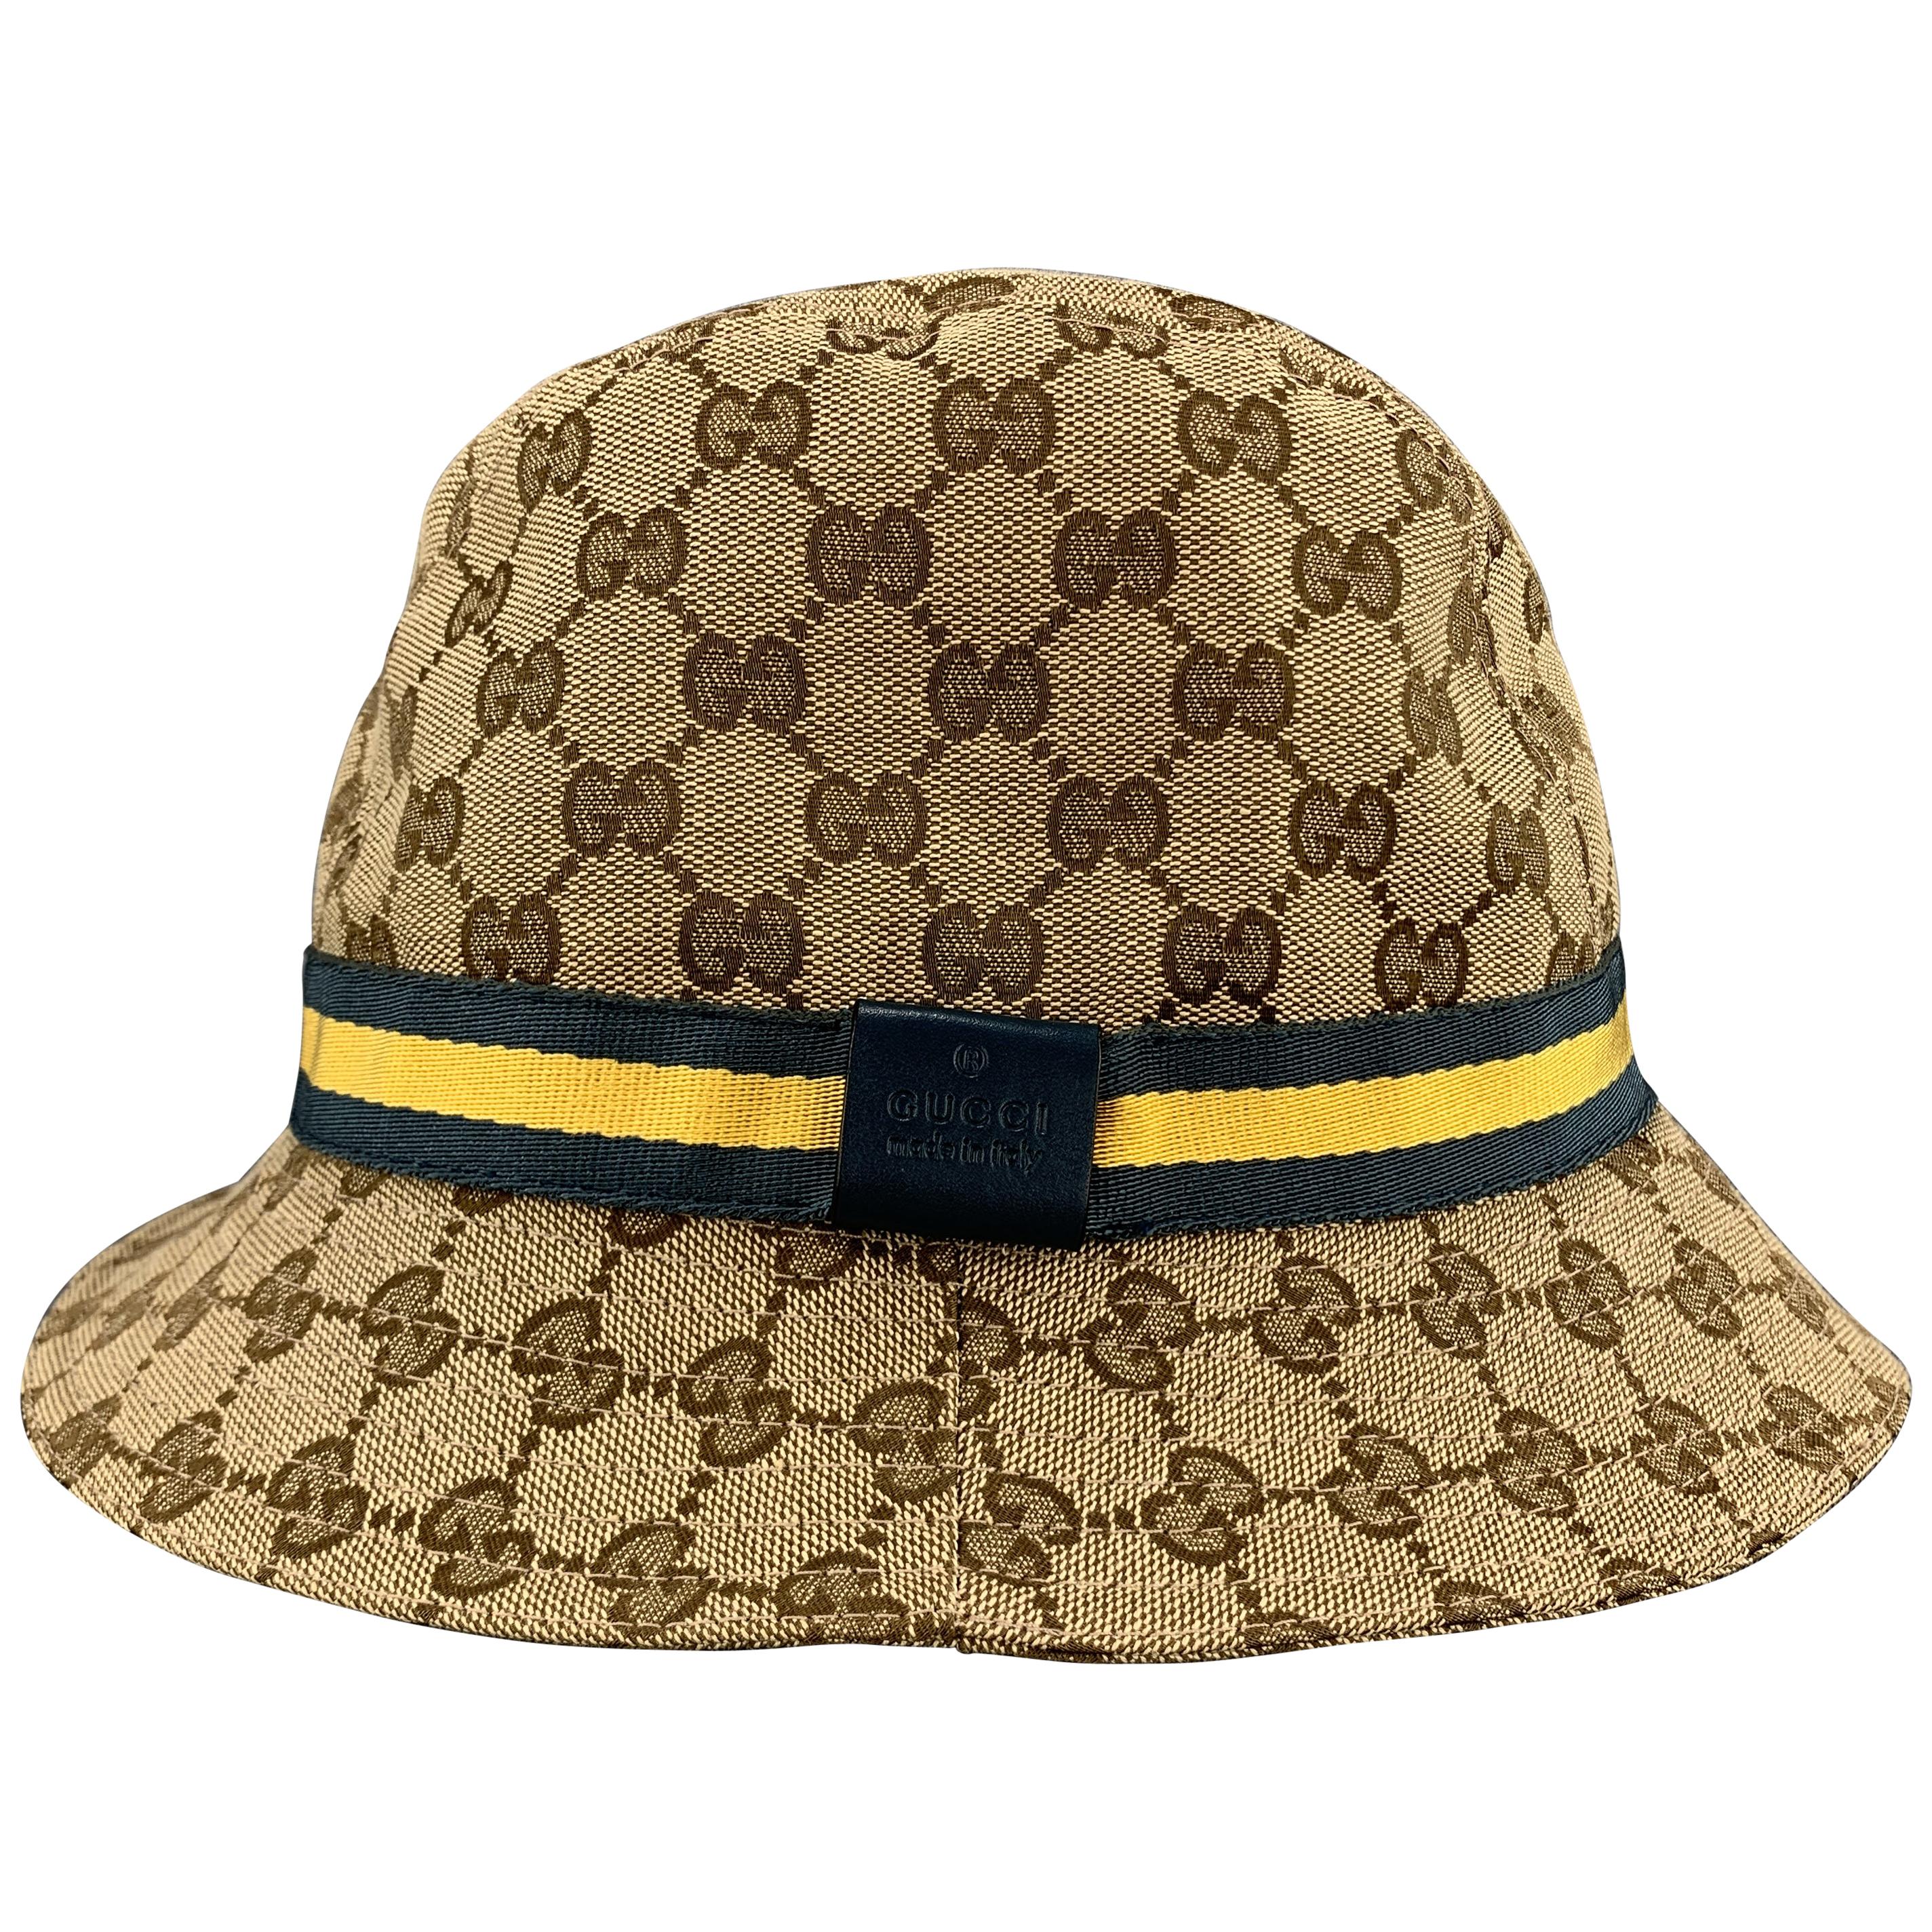 Gucci Cap - 13 For Sale on 1stDibs